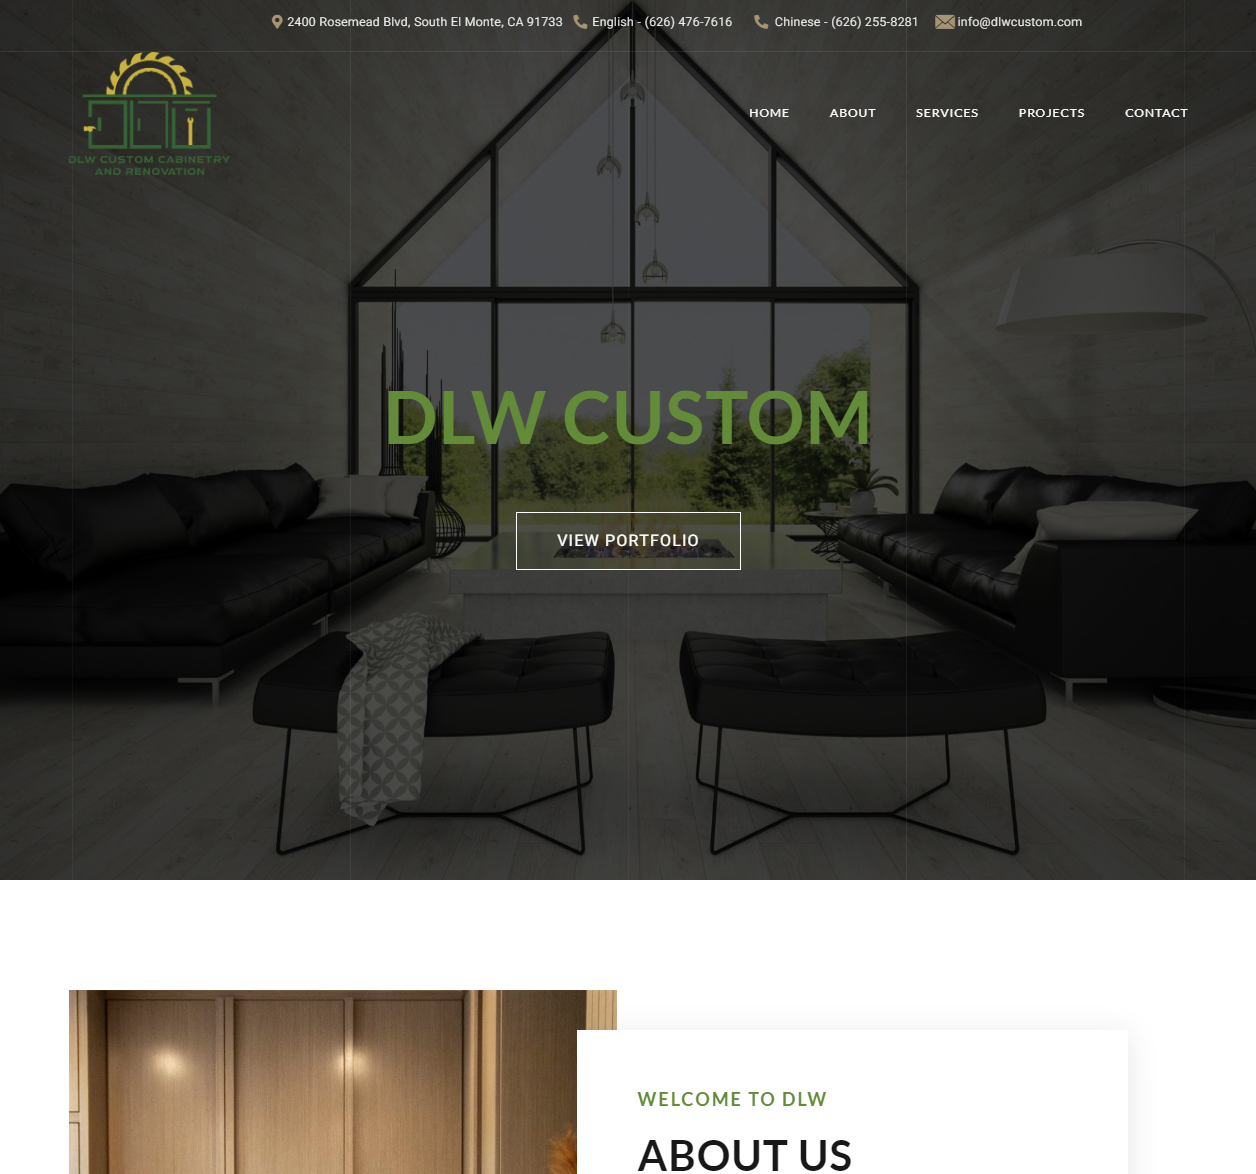 DLW Custom Cabinetry and Renovation Website